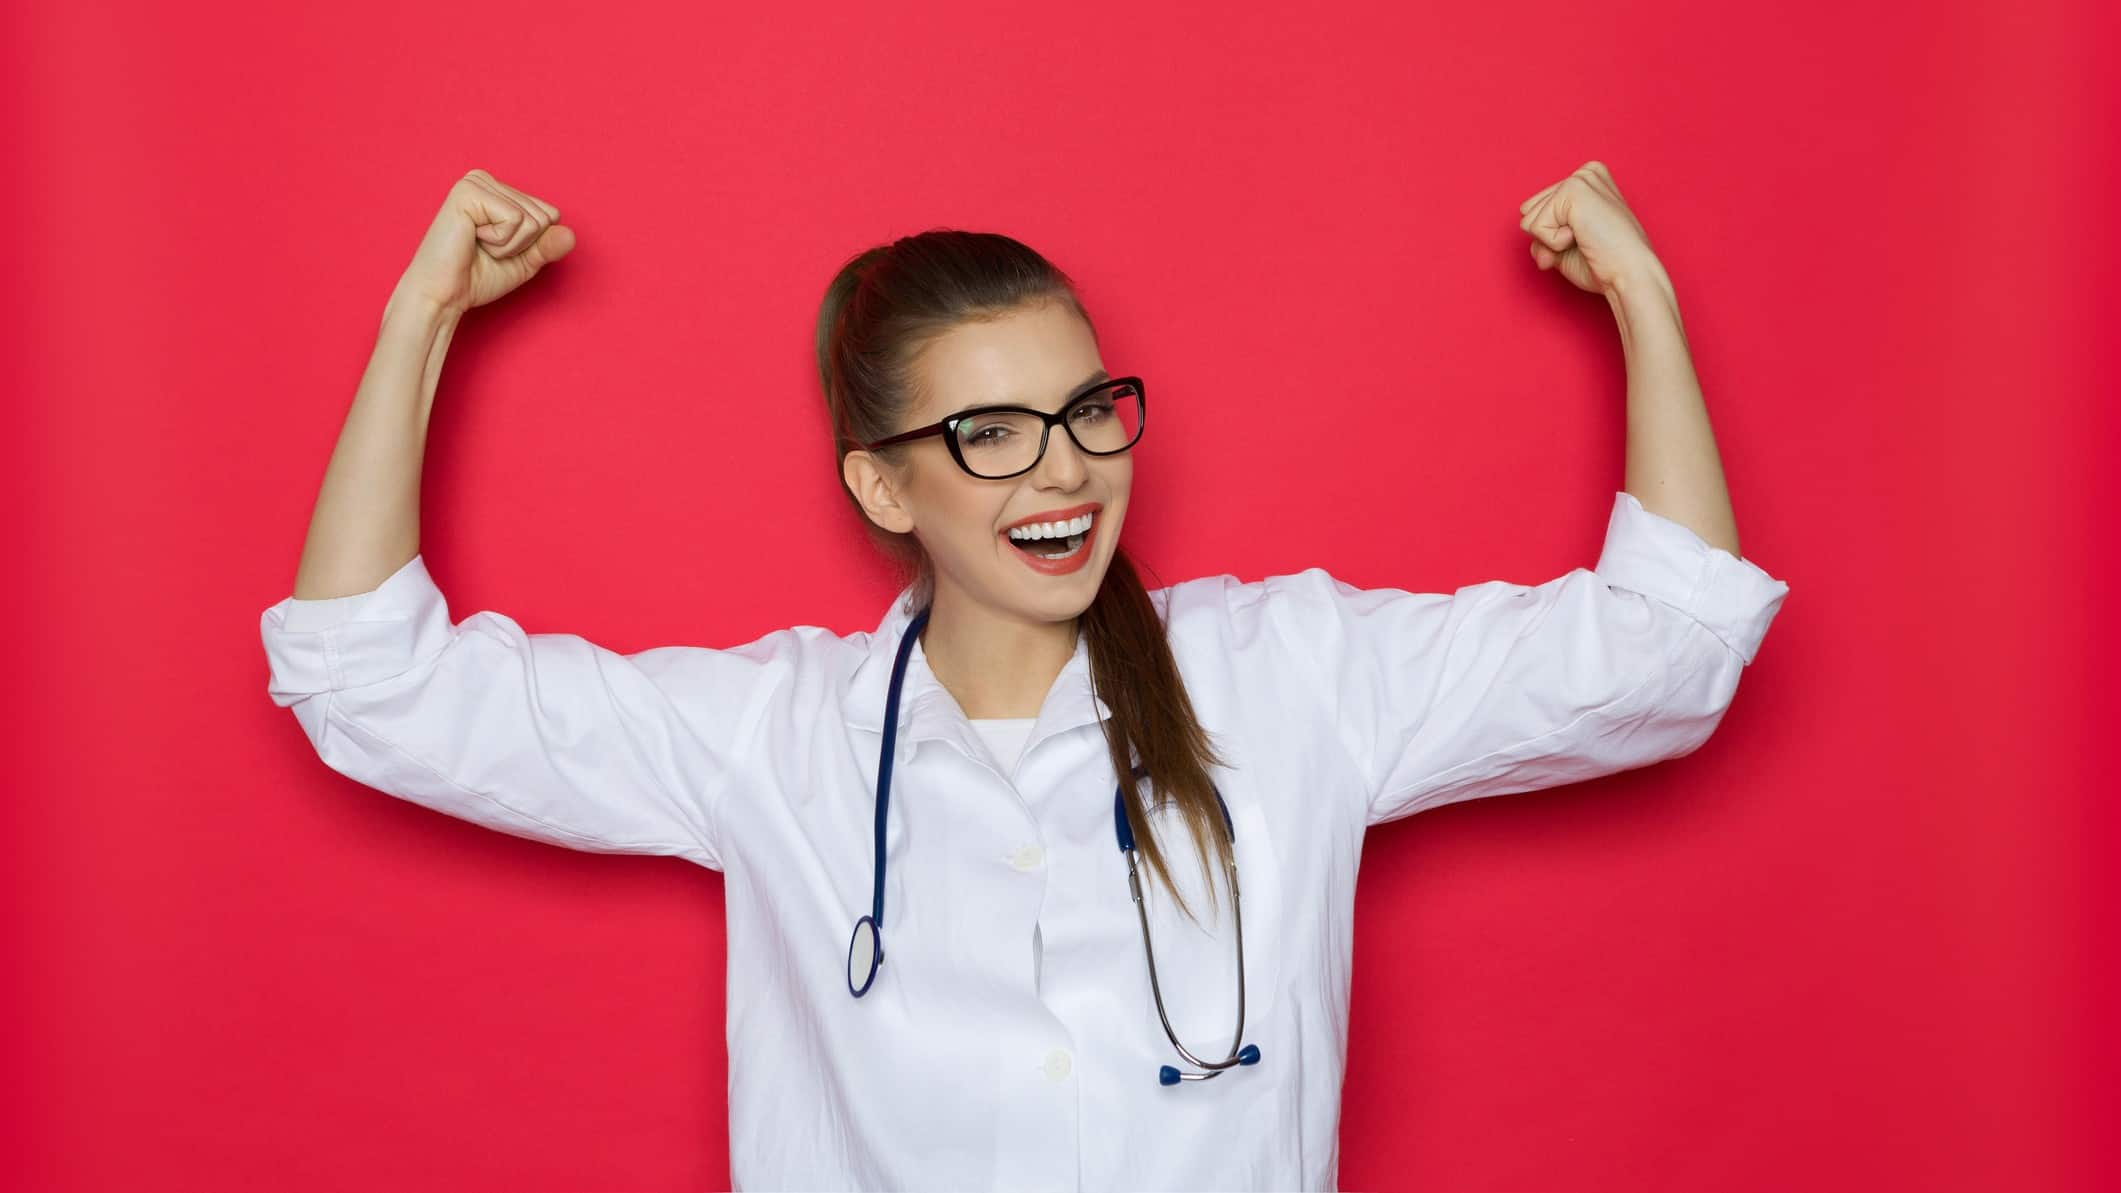 A scientist in a white coat and glasses puts her arms in the air in a sign of strength and success.